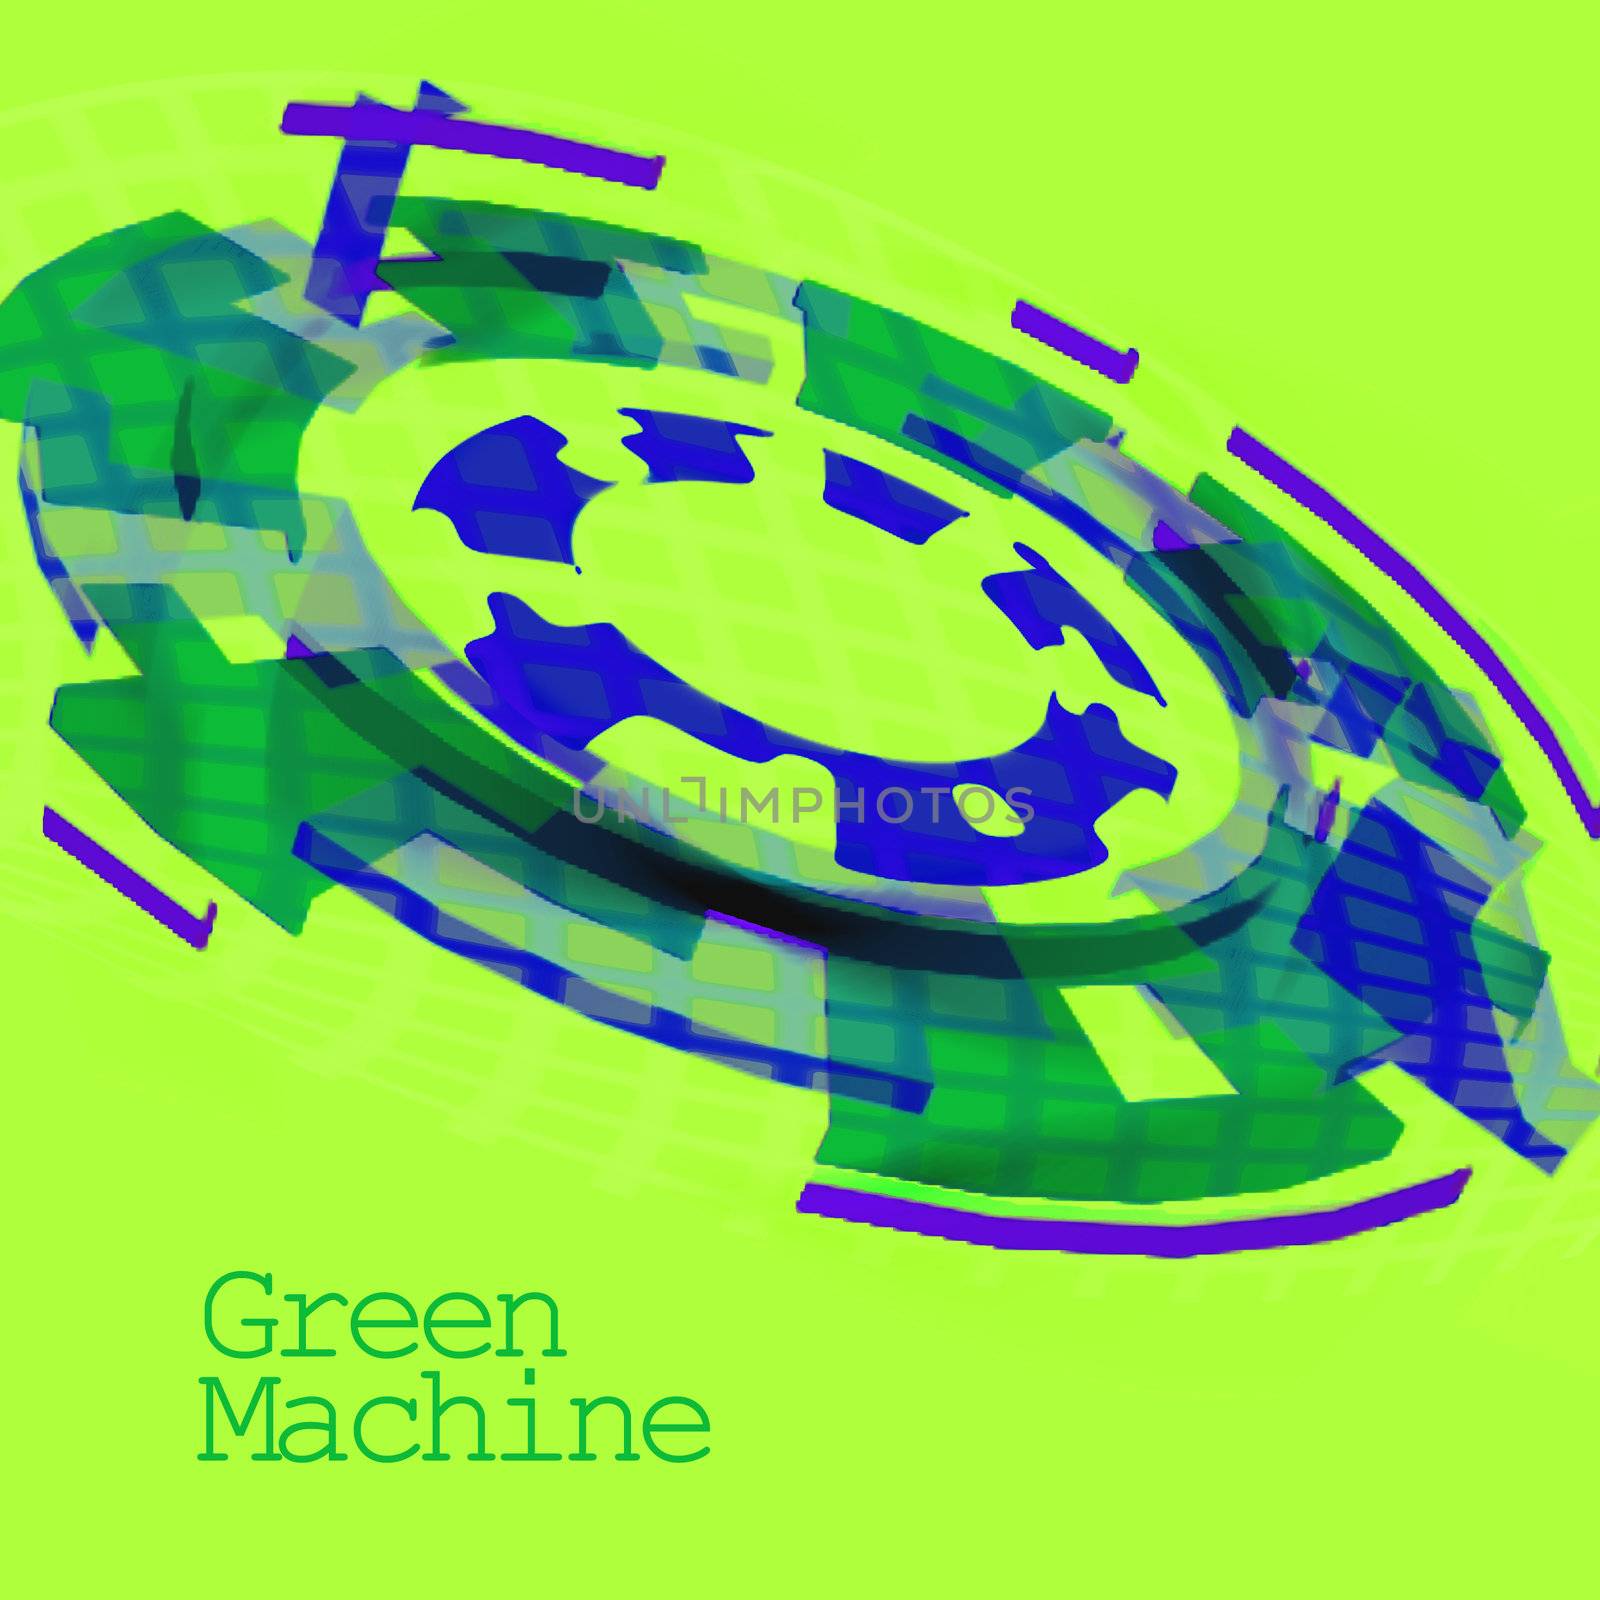 Green and Blue Cog Showing a Green Machine by bobbigmac